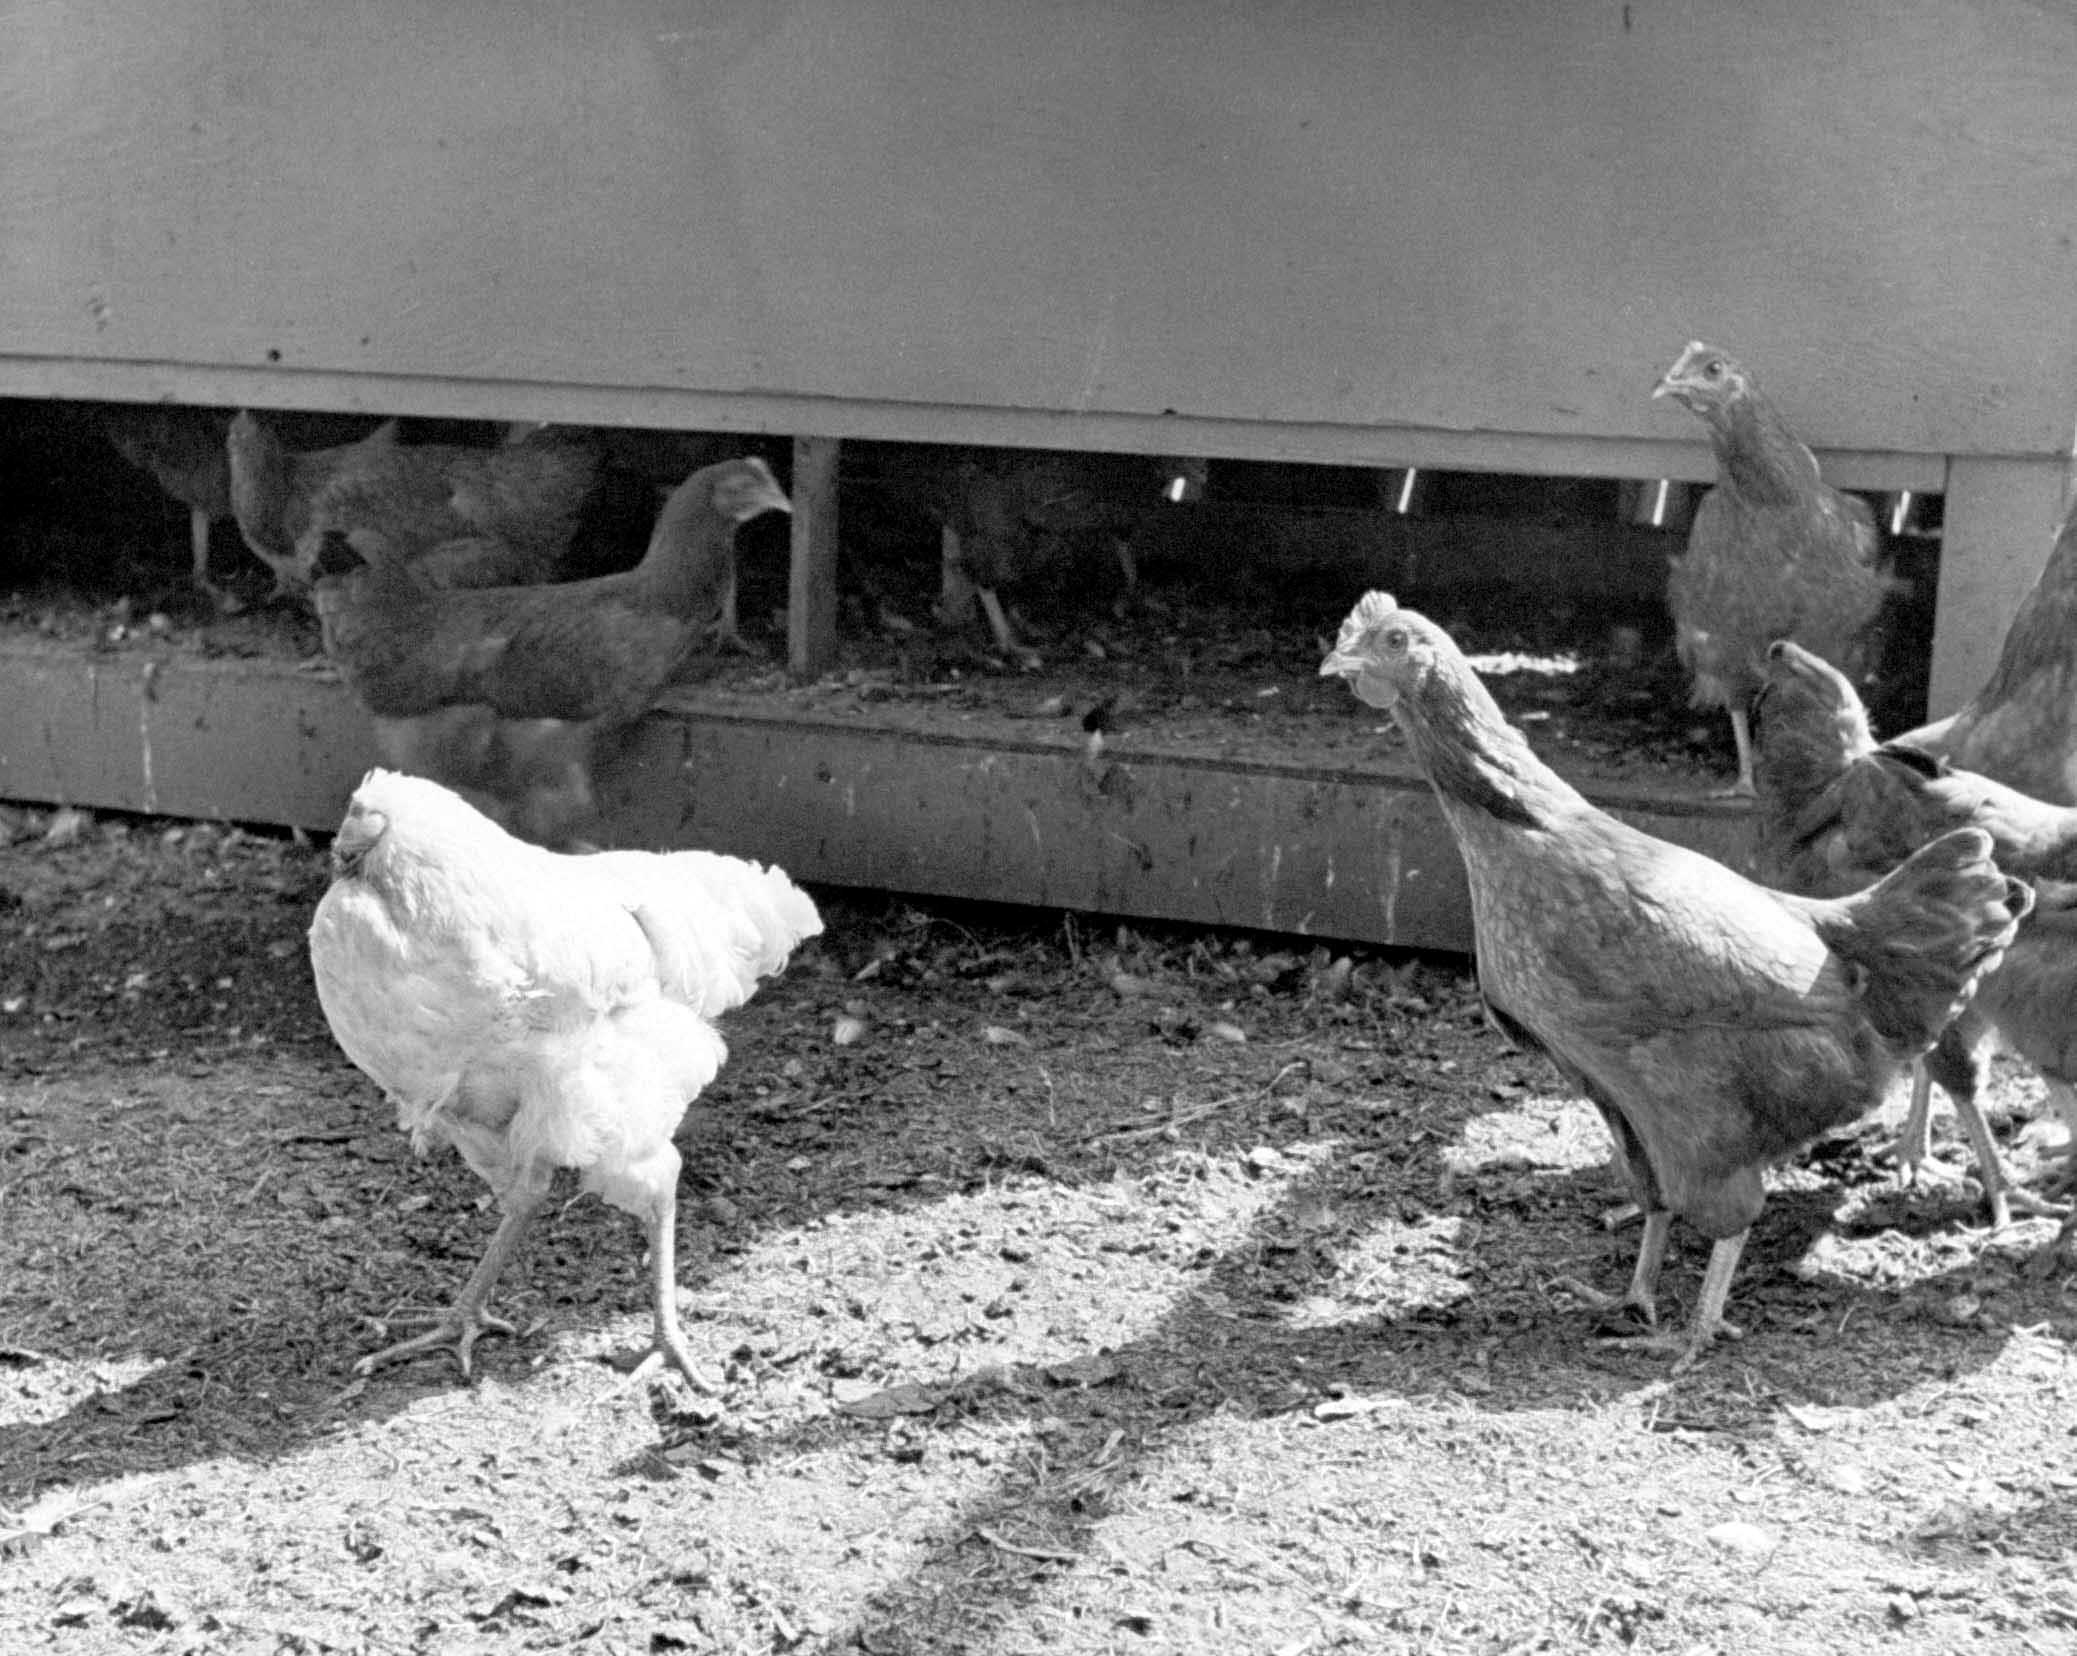 Mike the headless chicken in his Colorado barnyard, with fellow chickens, 1945.